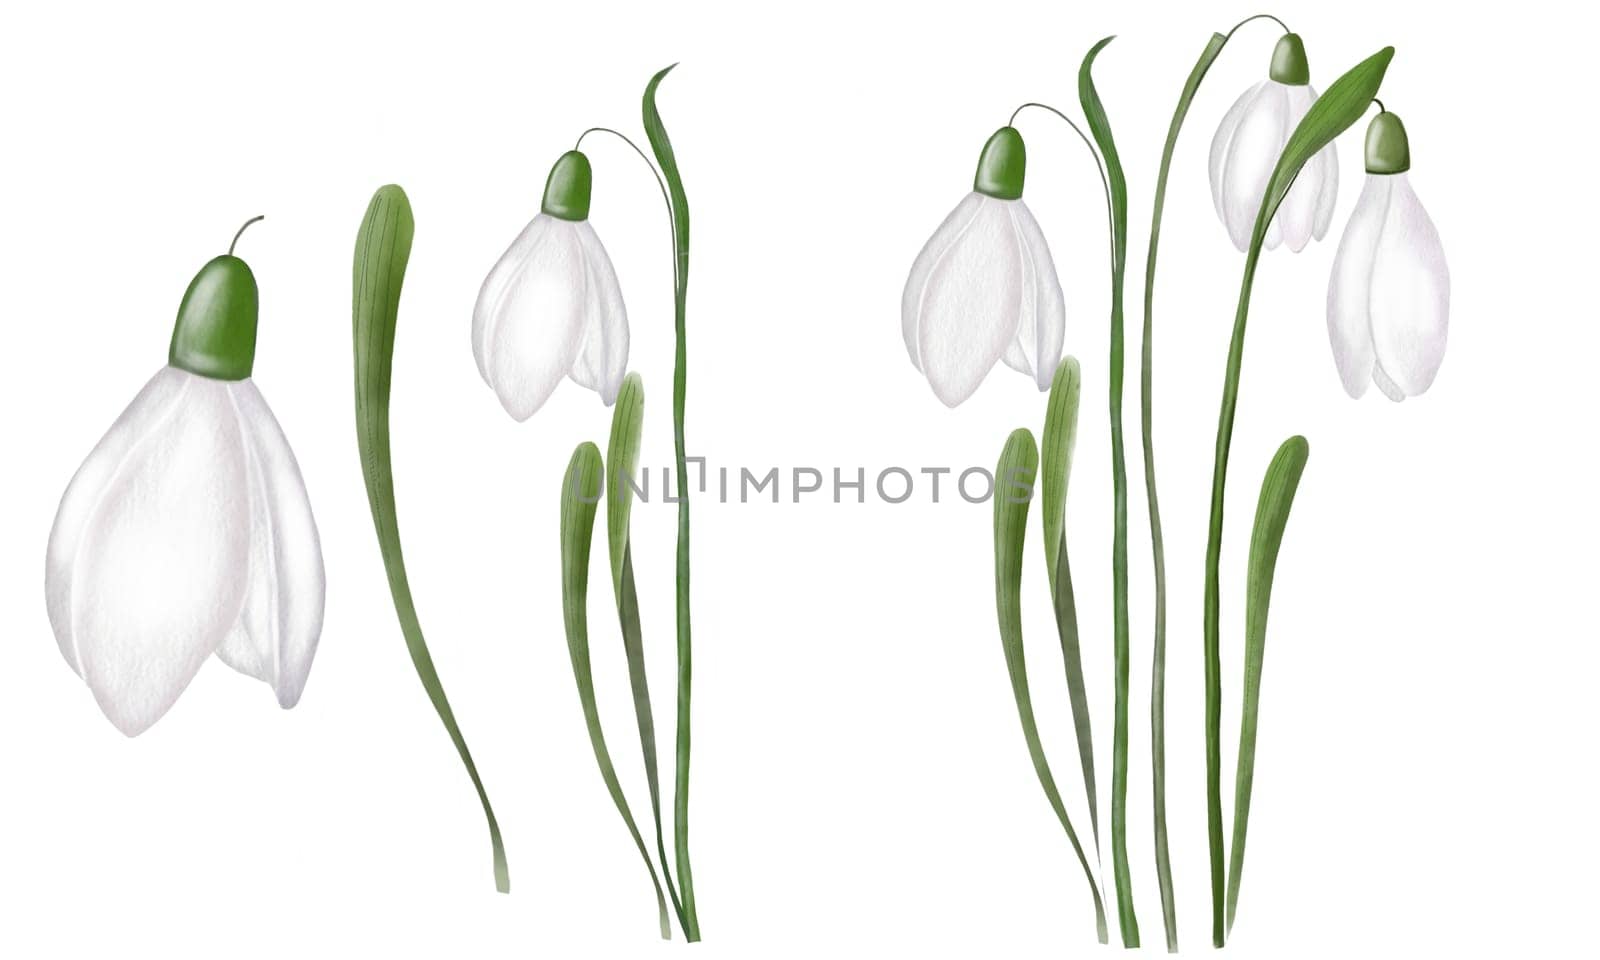 Watercolor hand drawn snowdrop flowers set of isolates. Delicate elegant illustration for the design of spring cards, invitations and tags. by TatyanaTrushcheleva